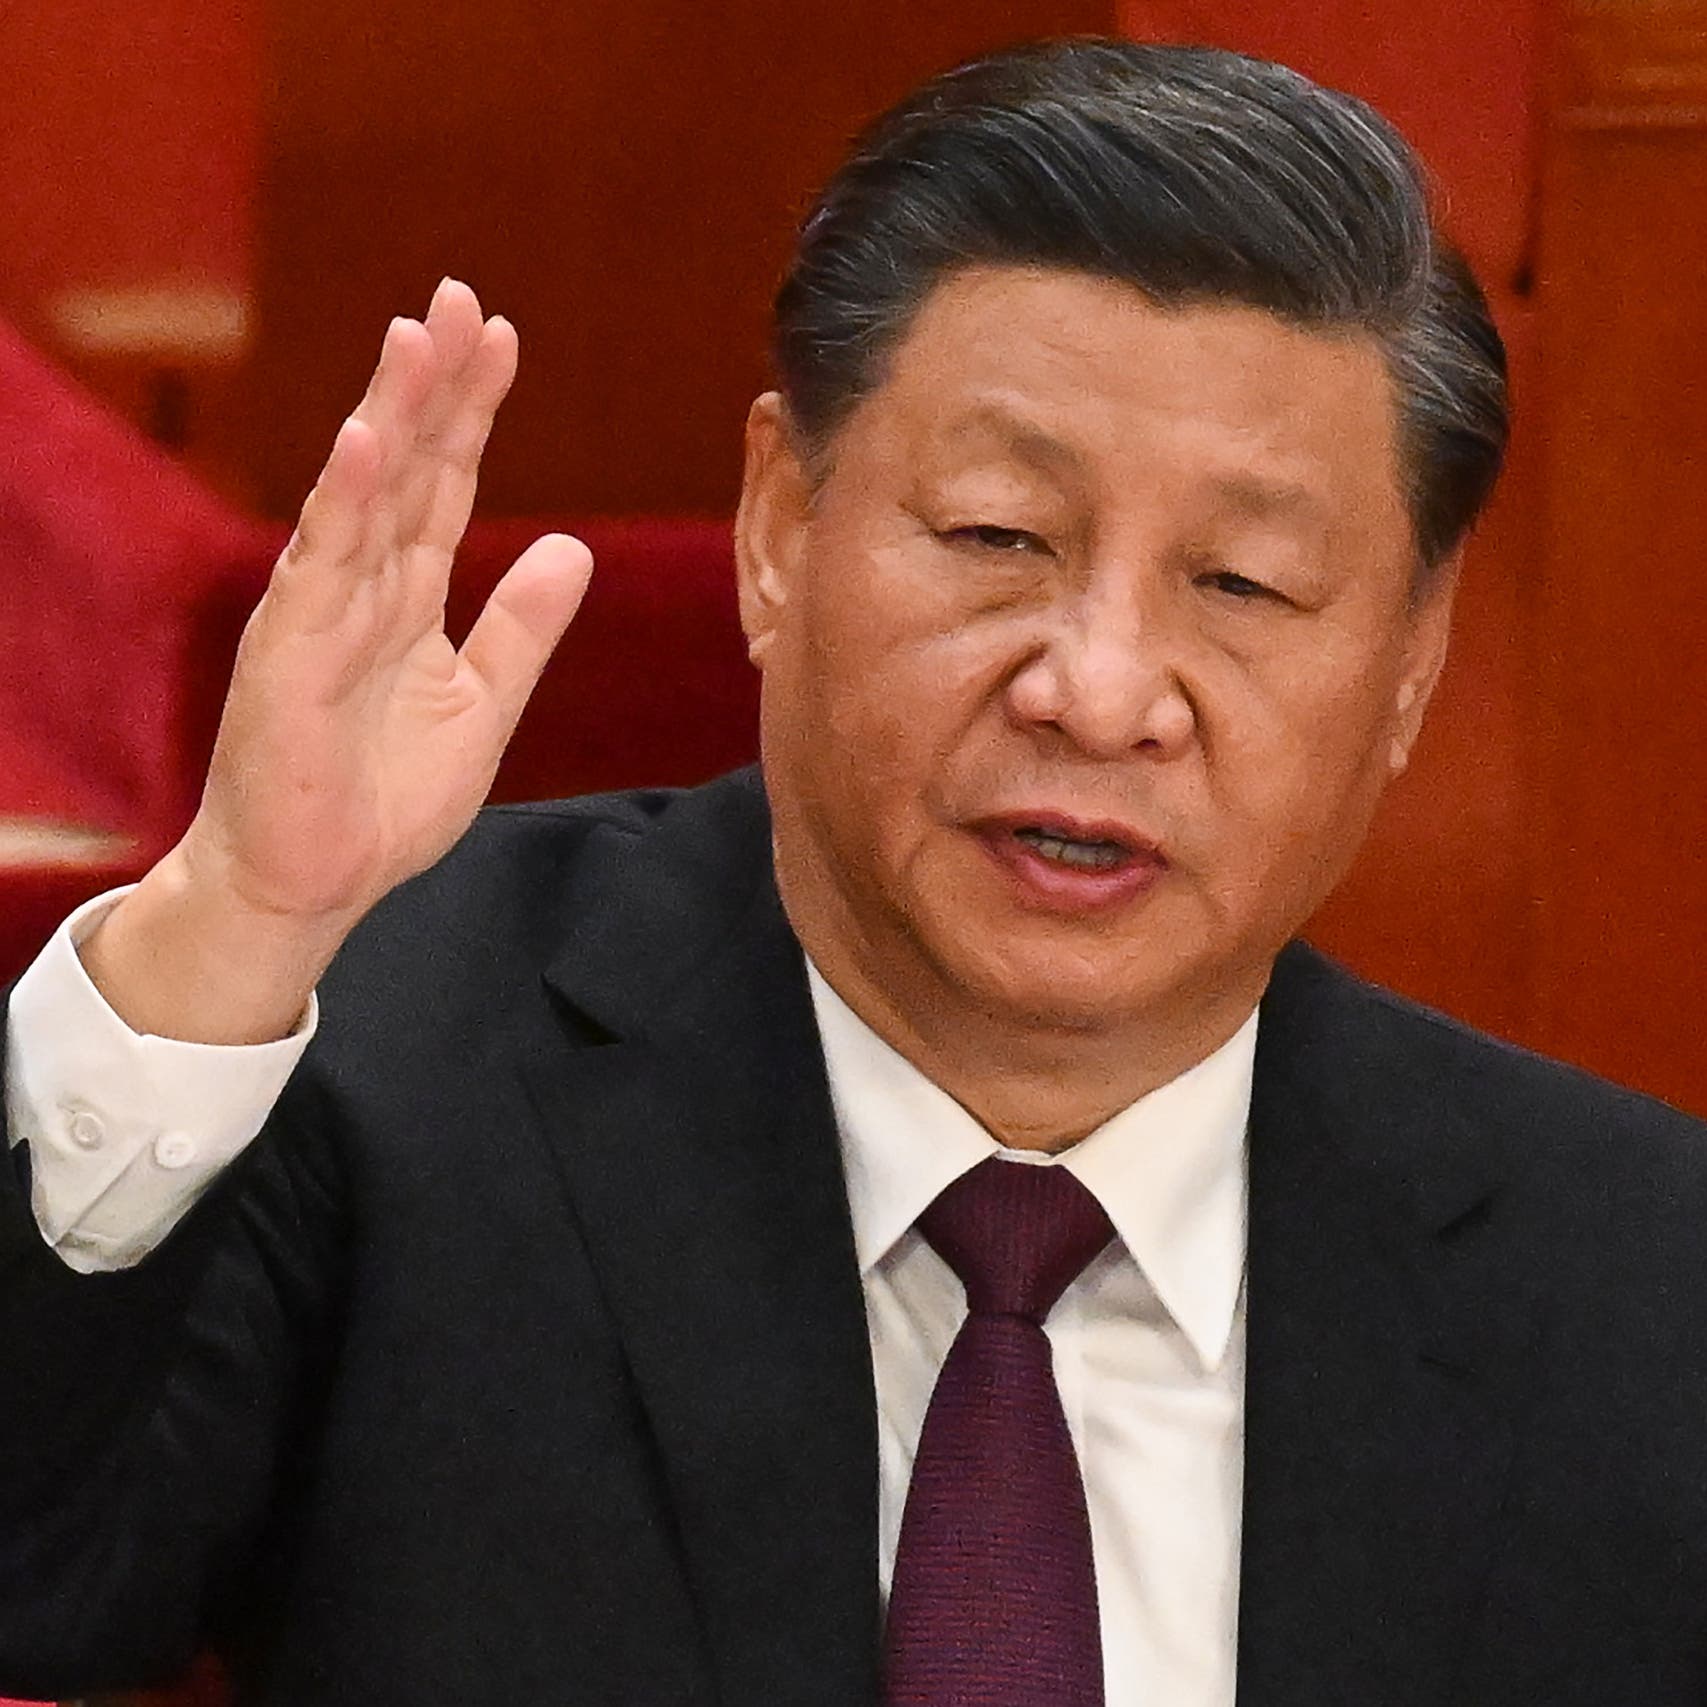 Xi Jinping secures third term as China leader: Report